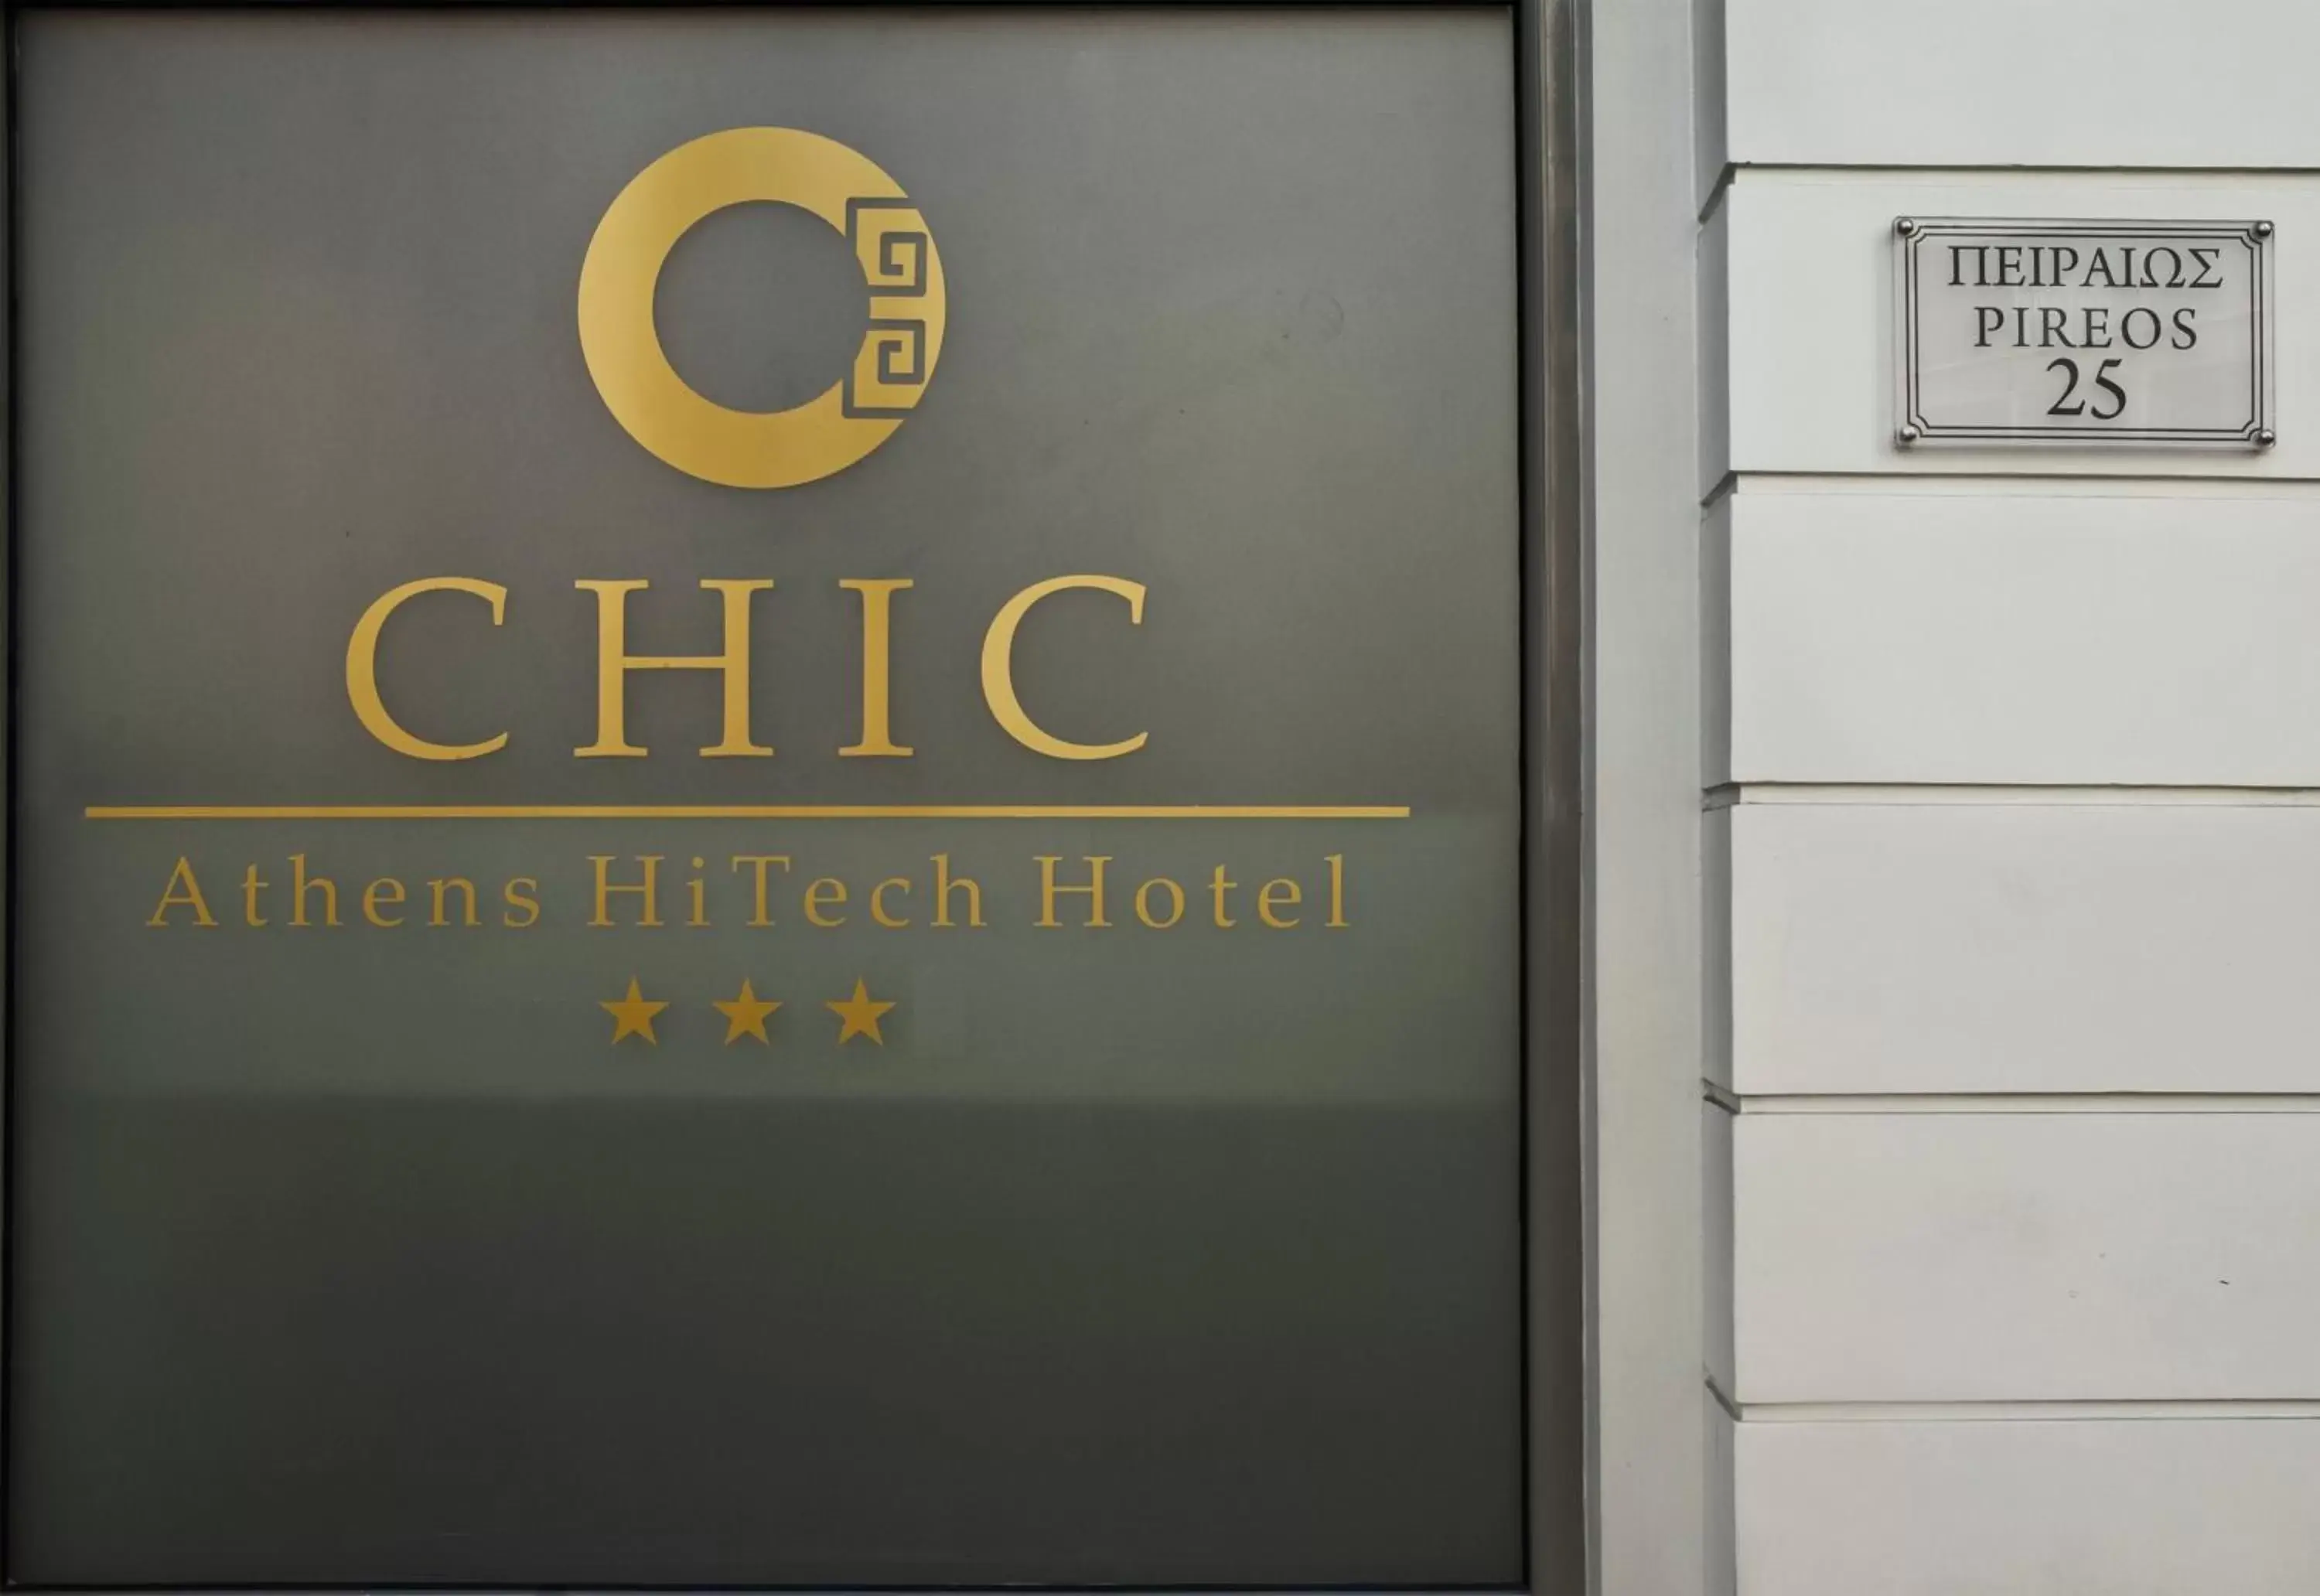 Property logo or sign in Chic Hotel